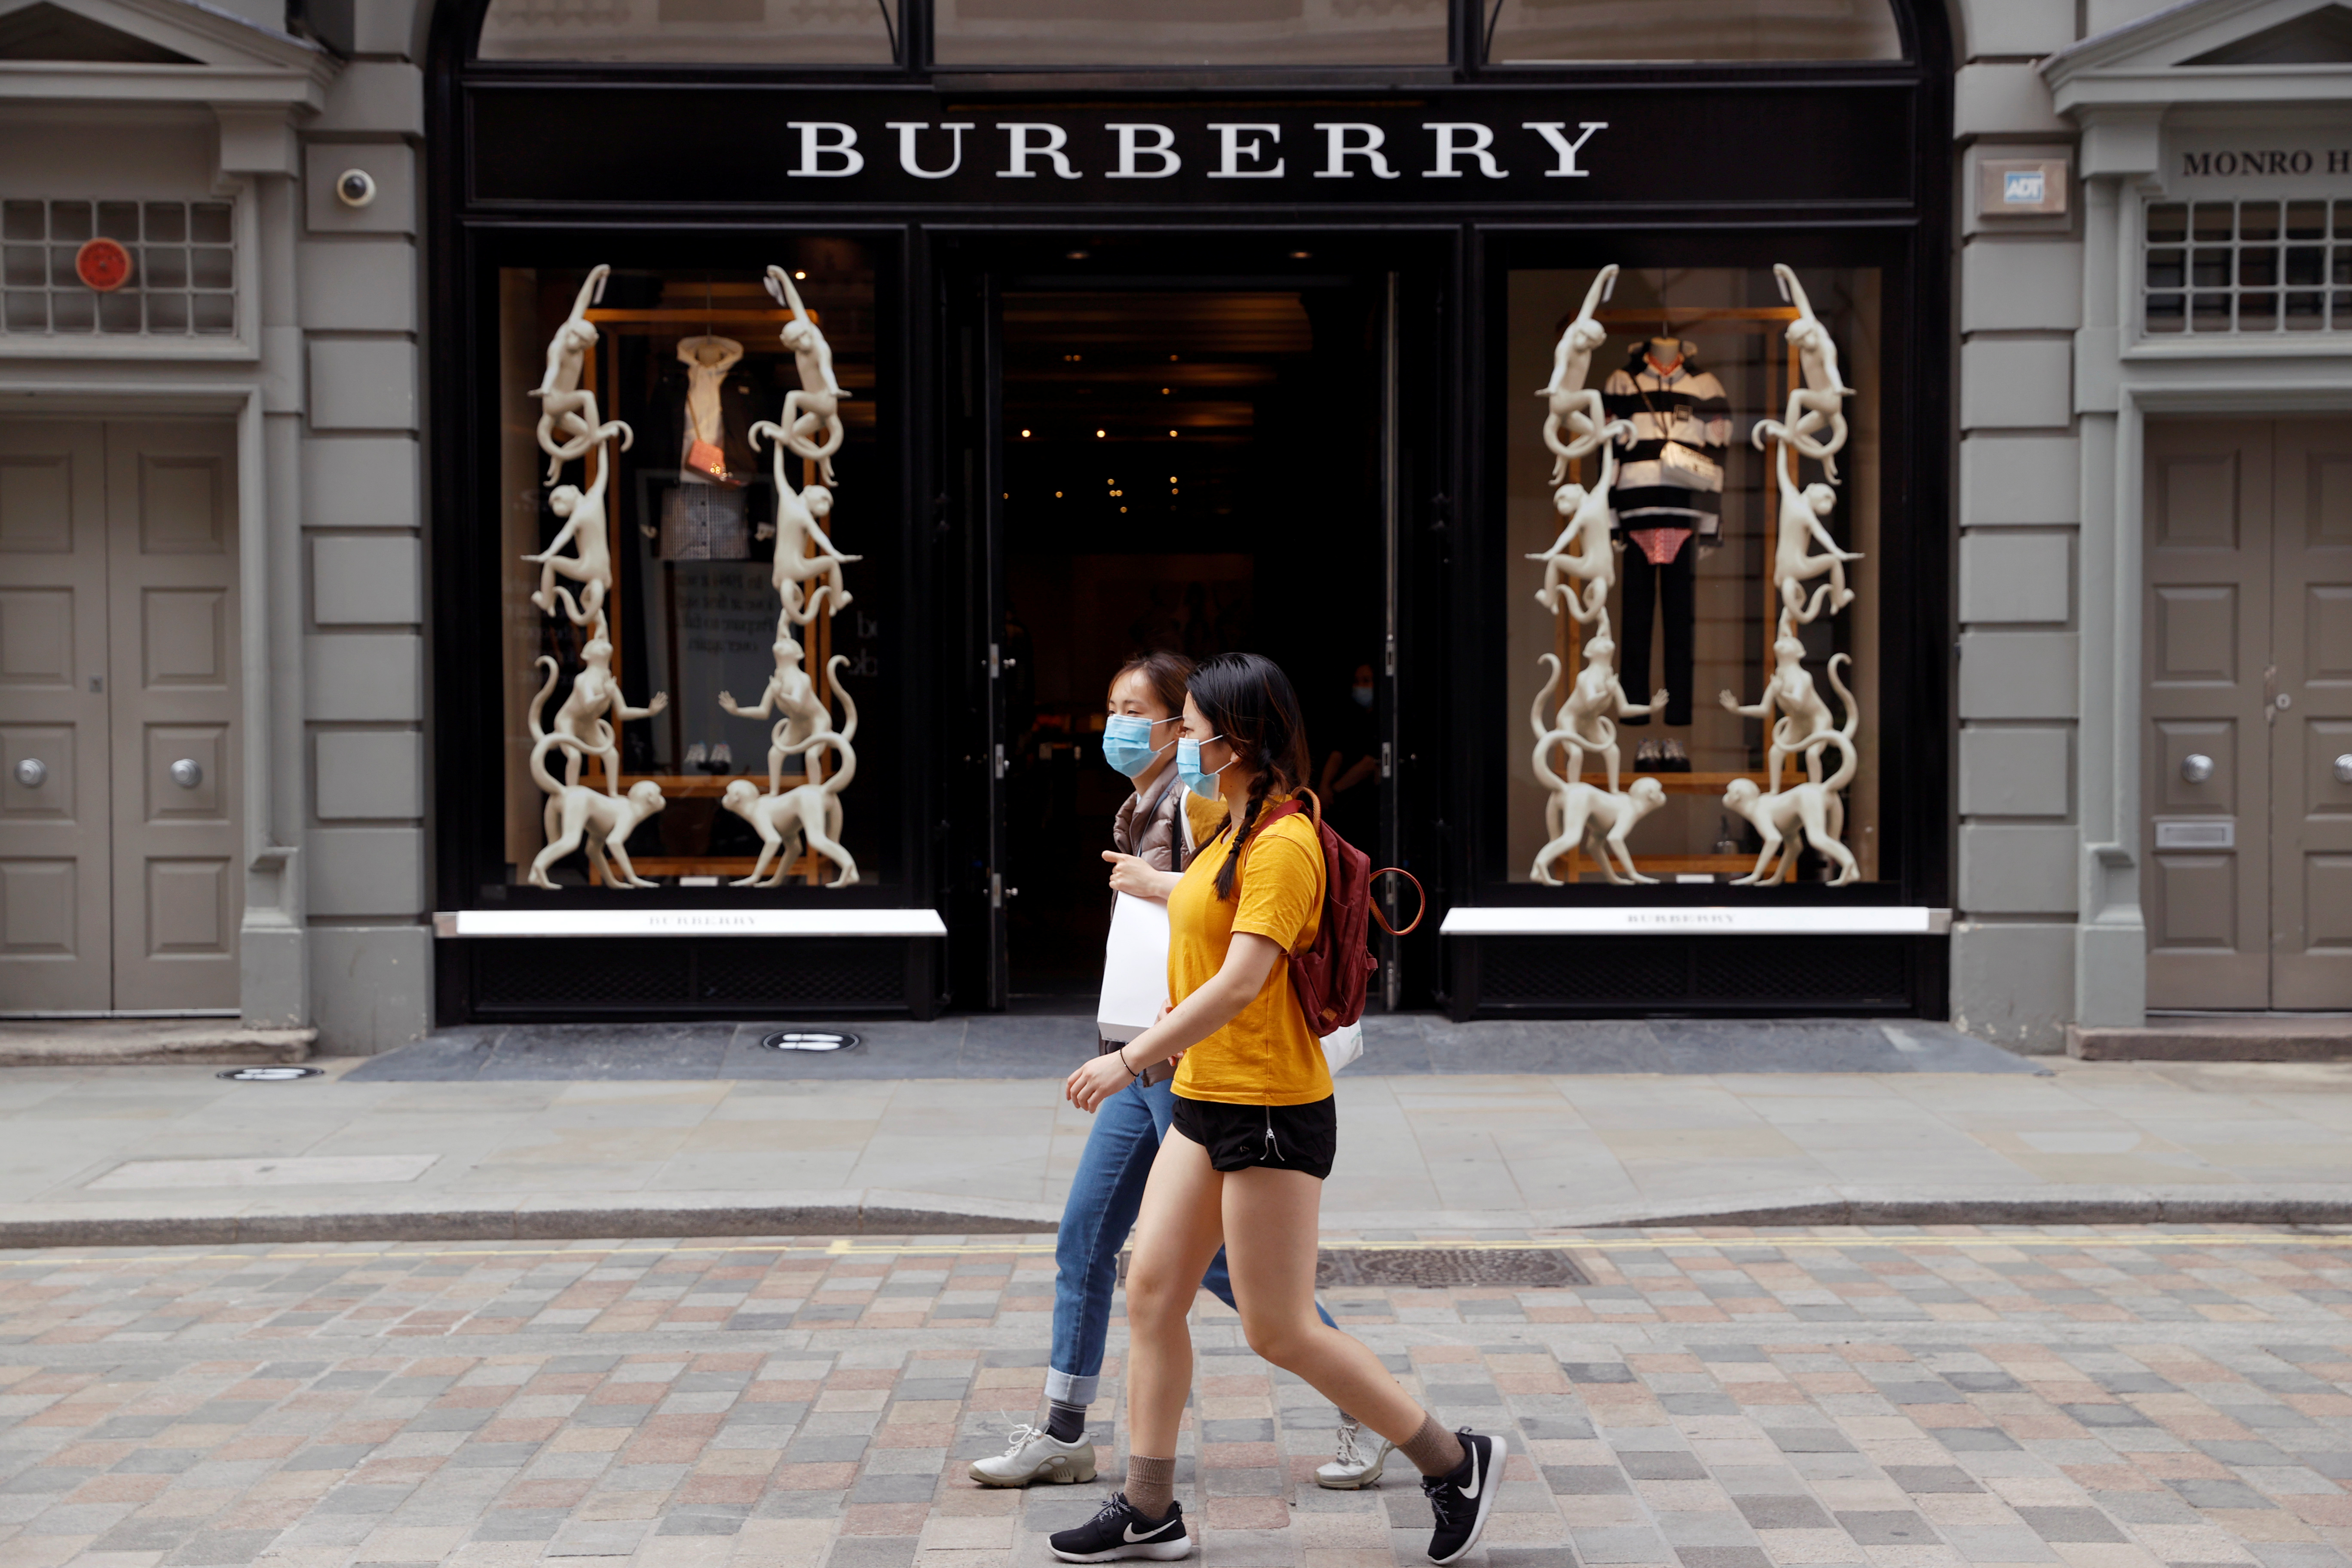 het is nutteloos Thespian Of later Burberry's cautious margin outlook takes shine off sales recovery | Reuters